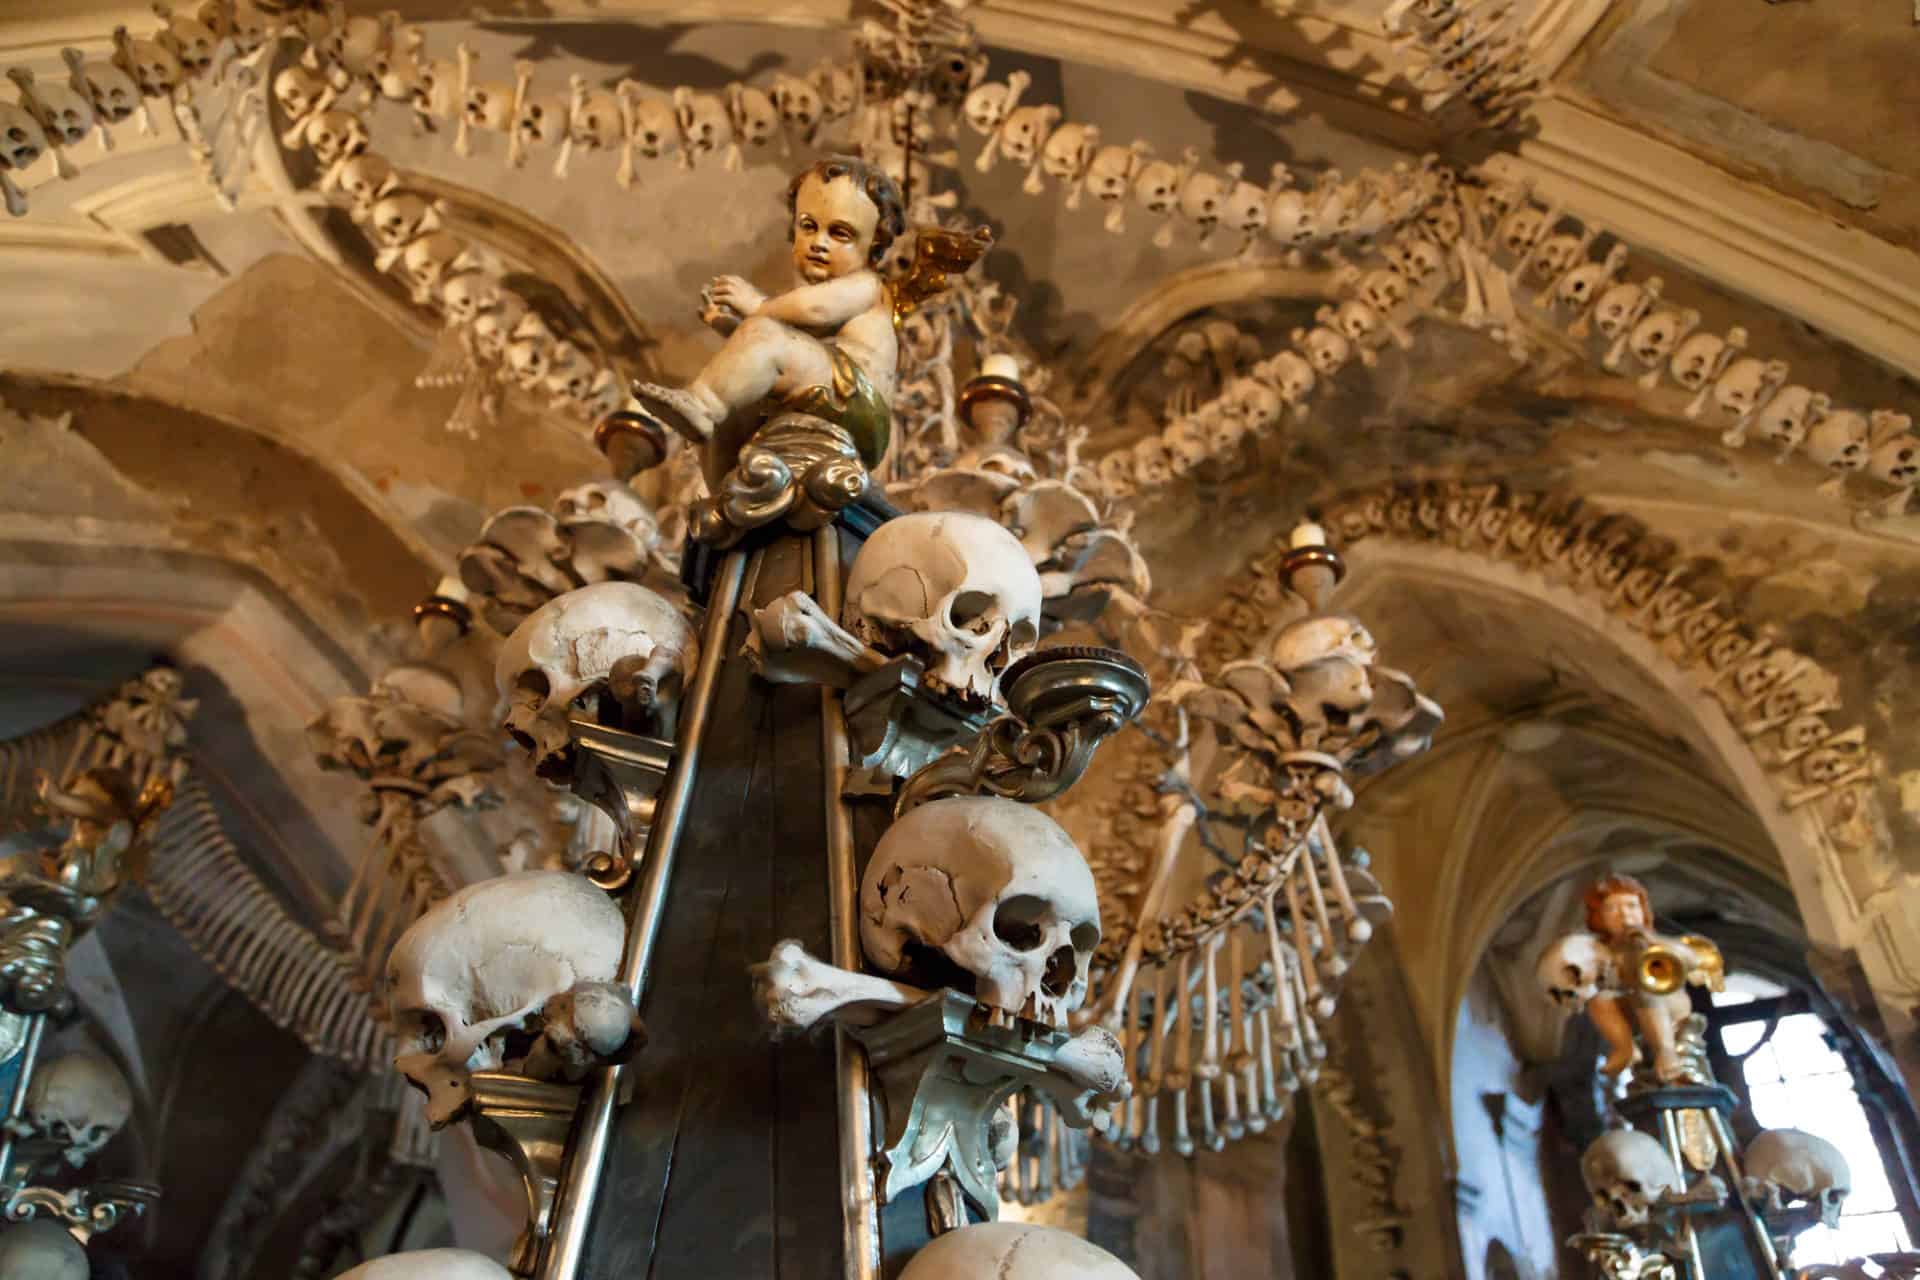 What are the Top 10 weirdest, most bizarre, and off-the-wall attractions across Europe?